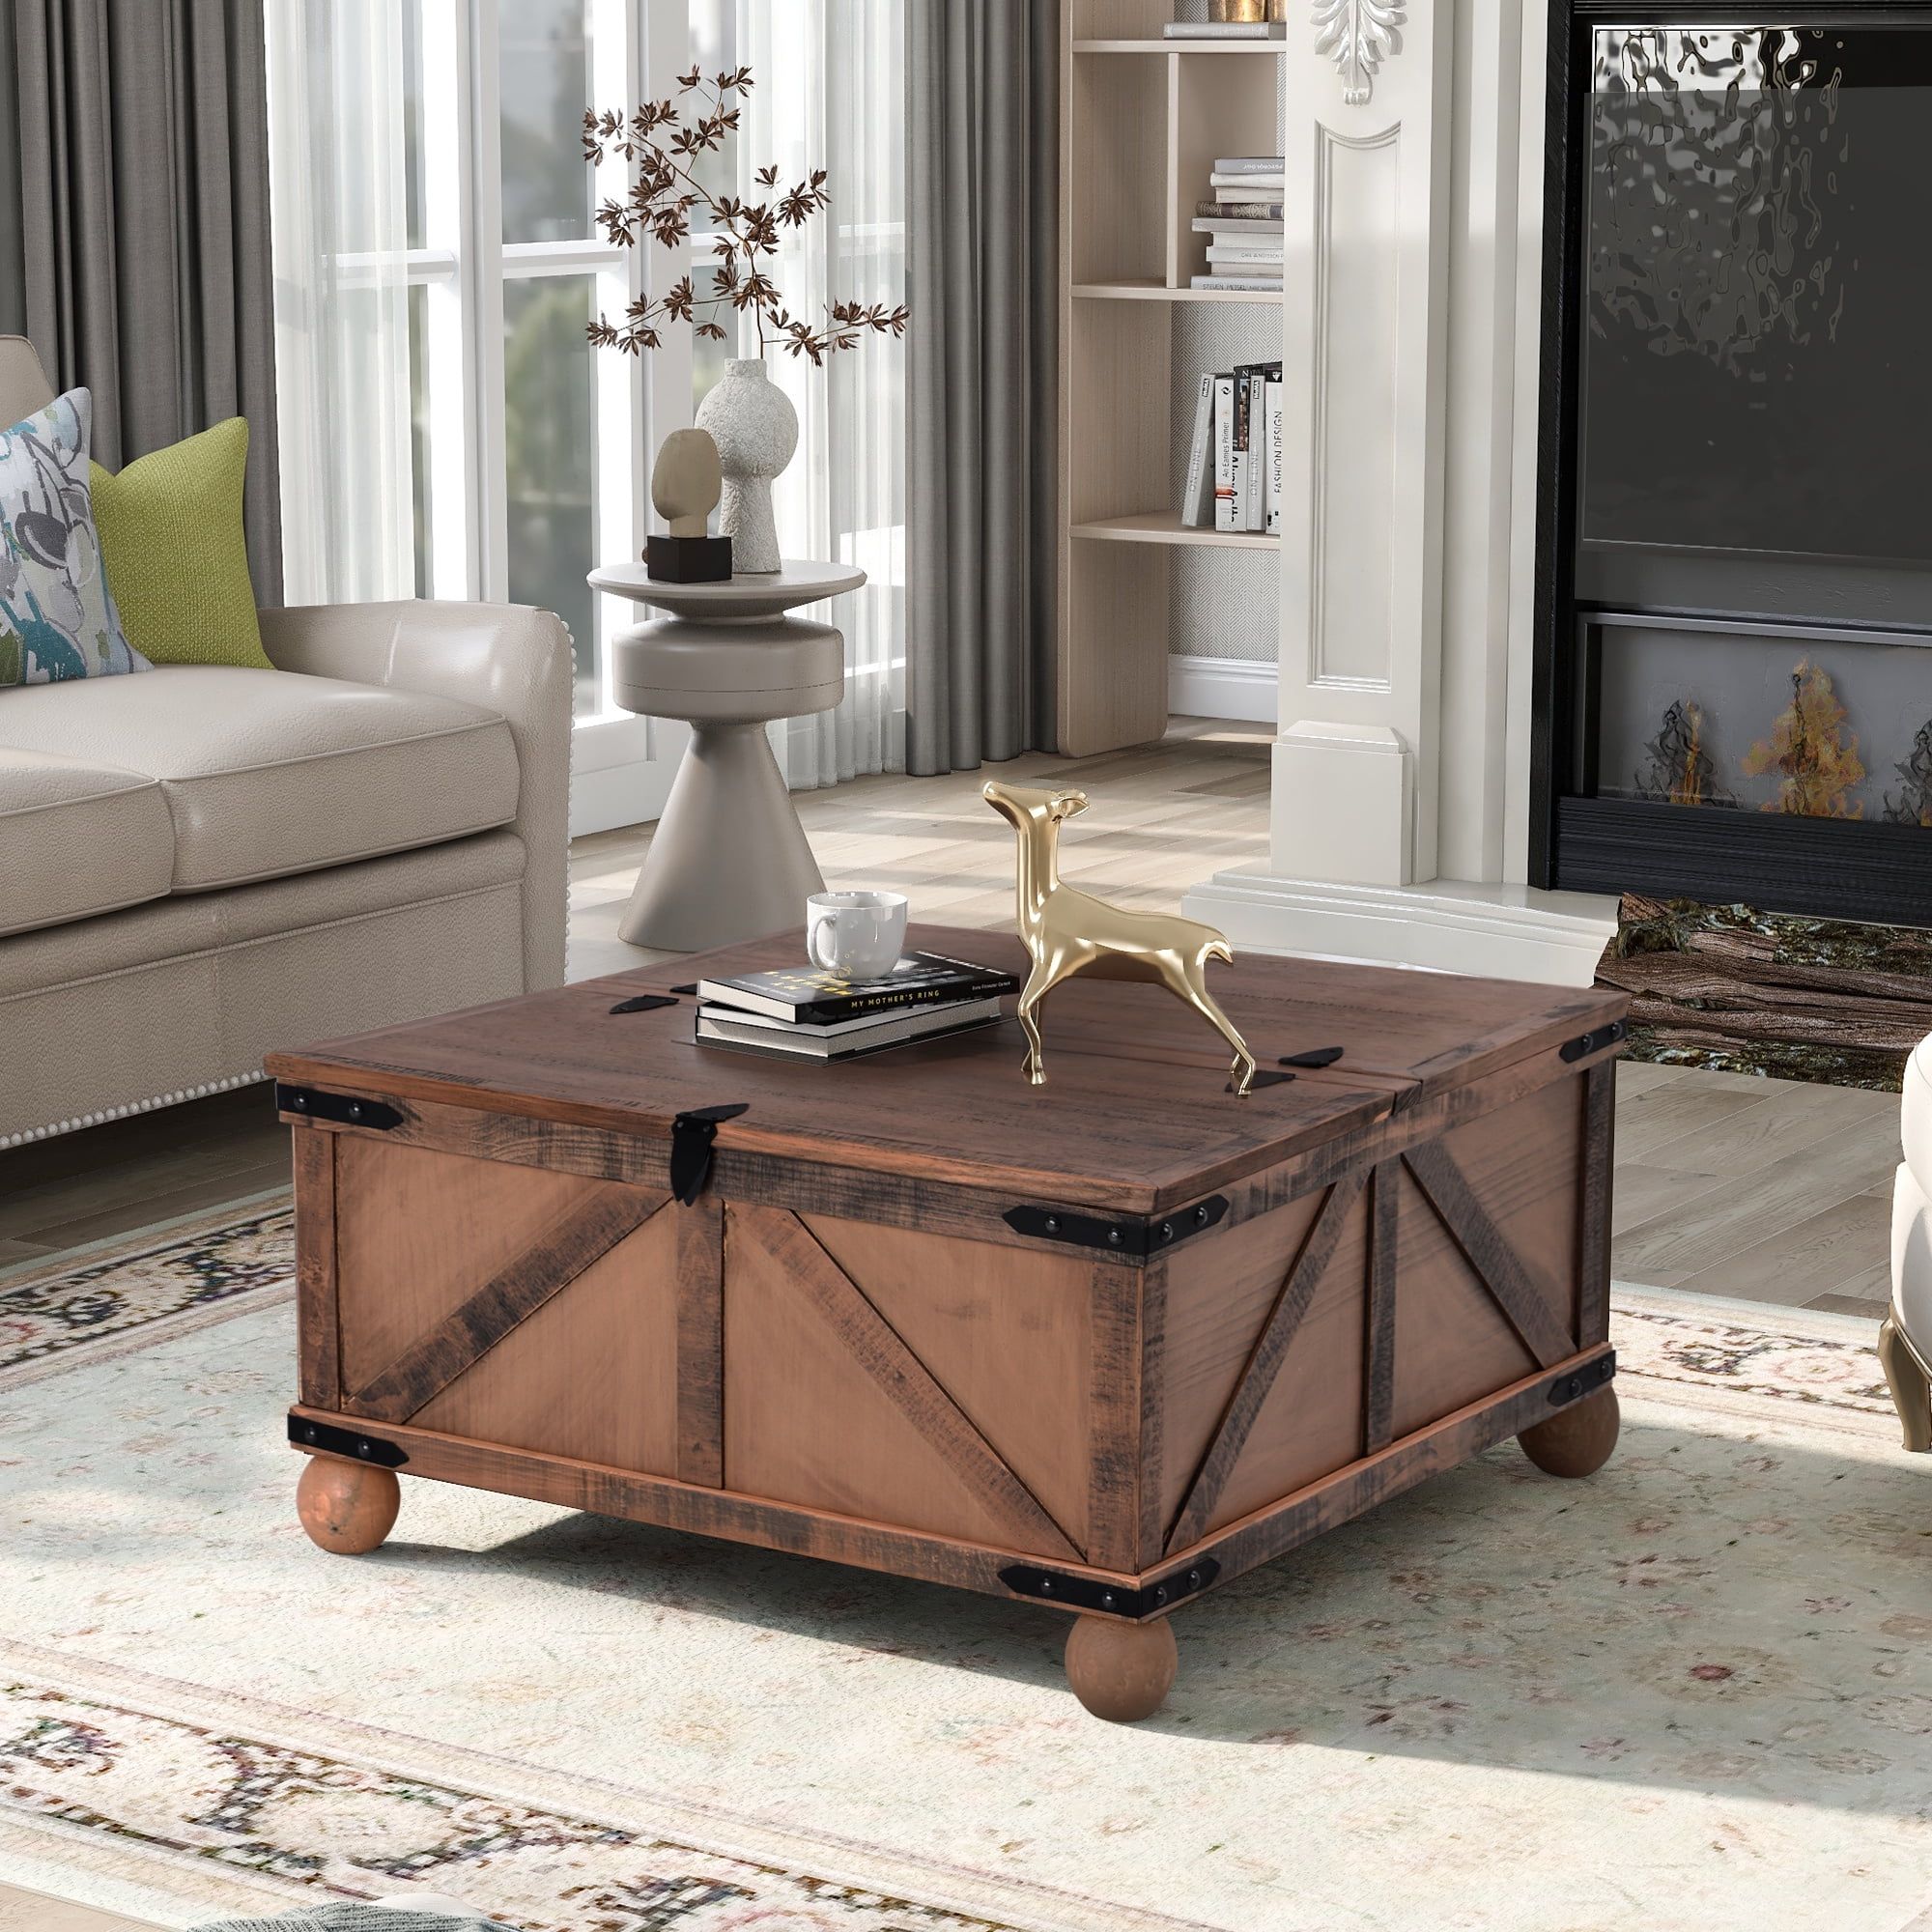 Farmhouse Square Coffee Table With Lift Top For Storage, Brown Intended For Farmhouse Lift Top Tables (View 7 of 15)